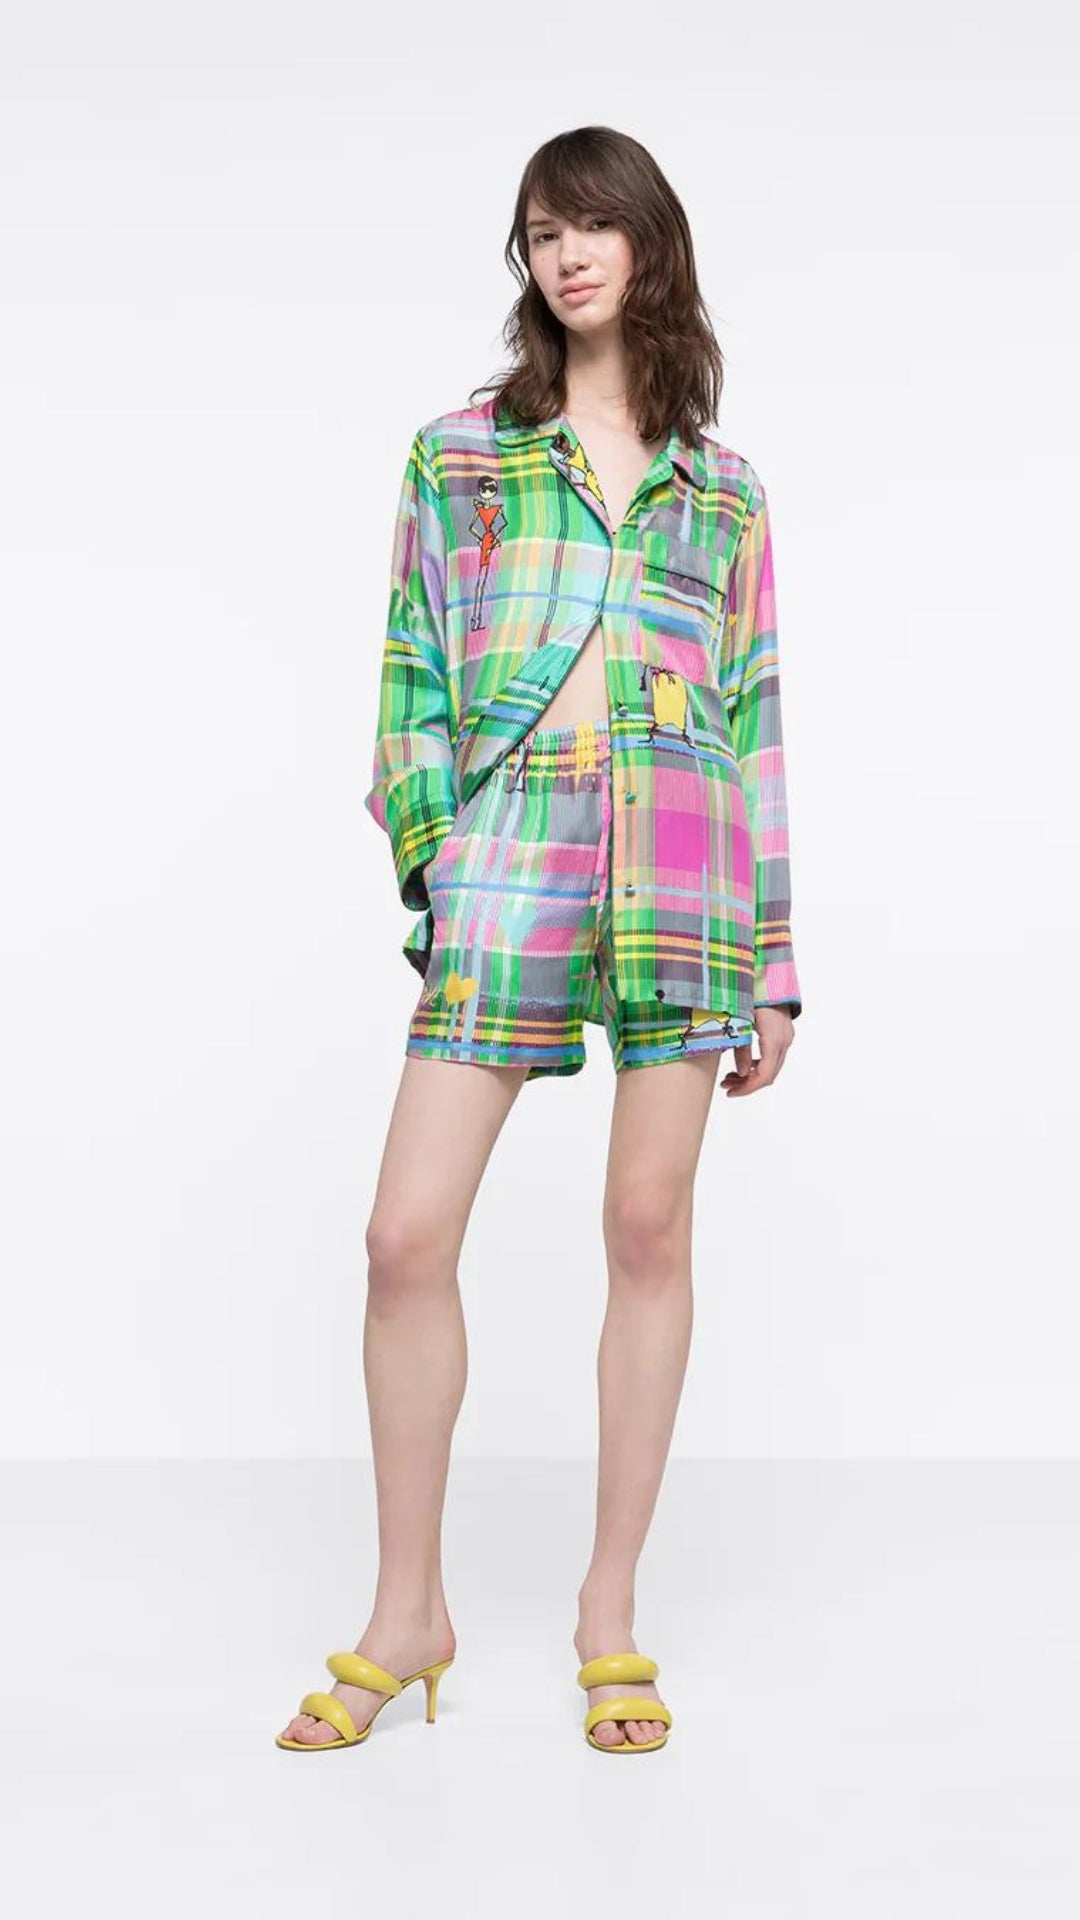 AZ Factory Chromatic Love Silk Blouse. Elastic waist silk shorts in multi color plaid with Alber Elbaz sketches on top. Shown on model facing front.